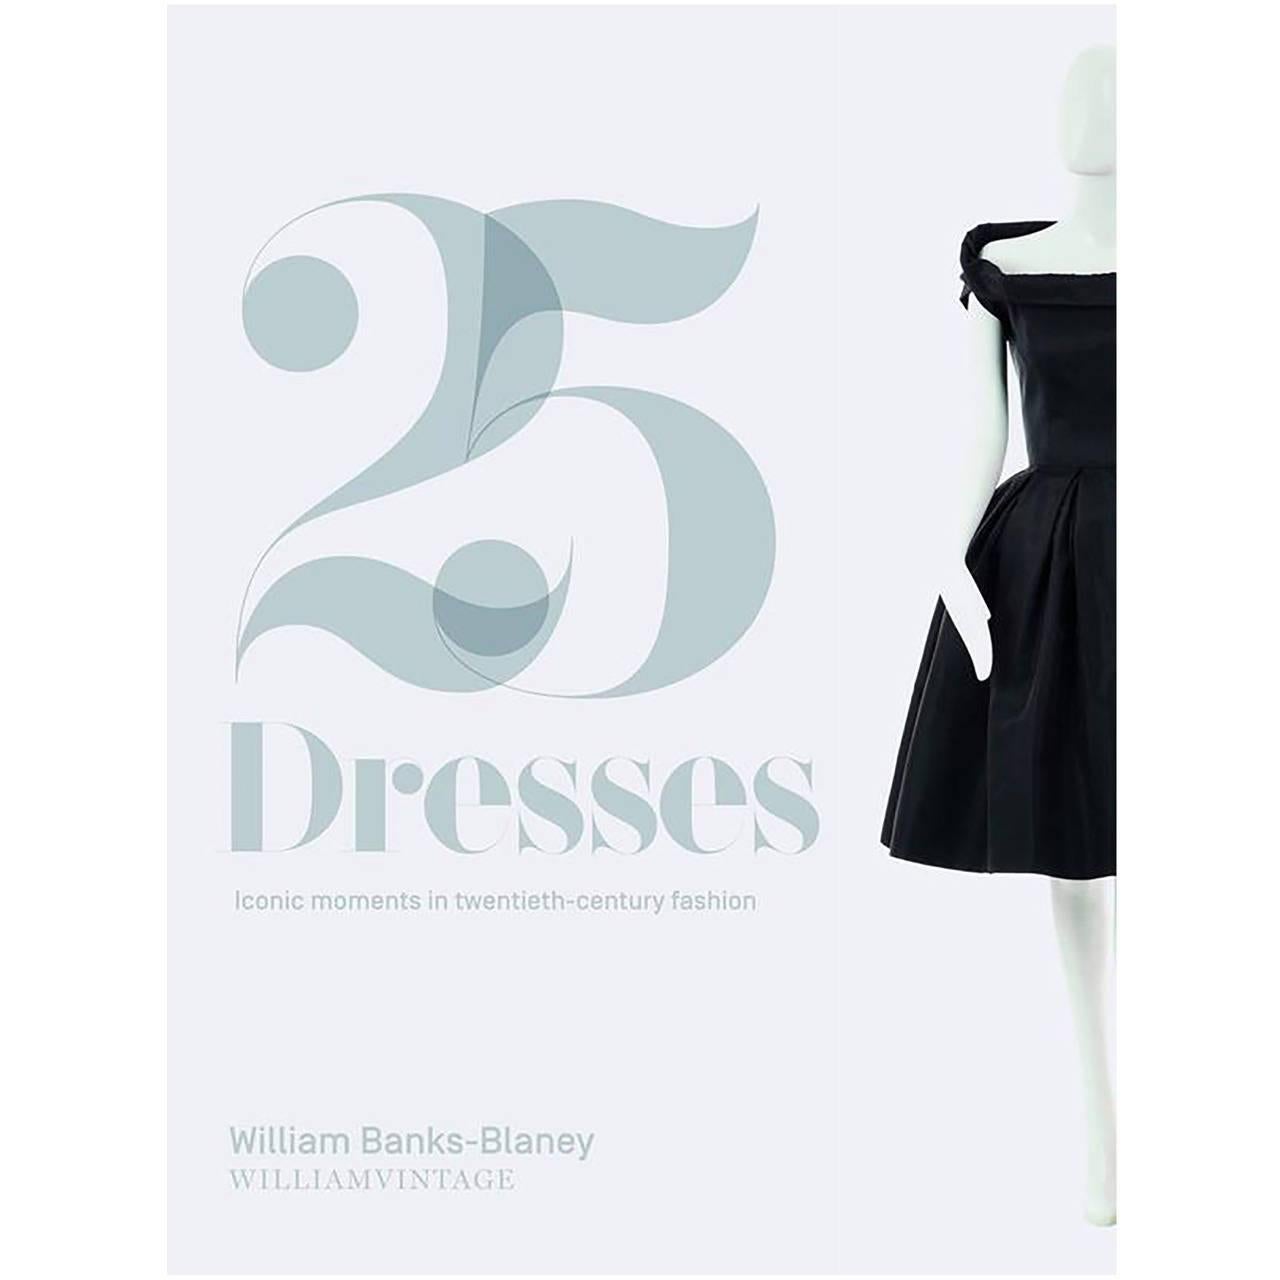 25 Dresses: Iconic Moments in Twentieth-Century Fashion, by William Banks-Blaney